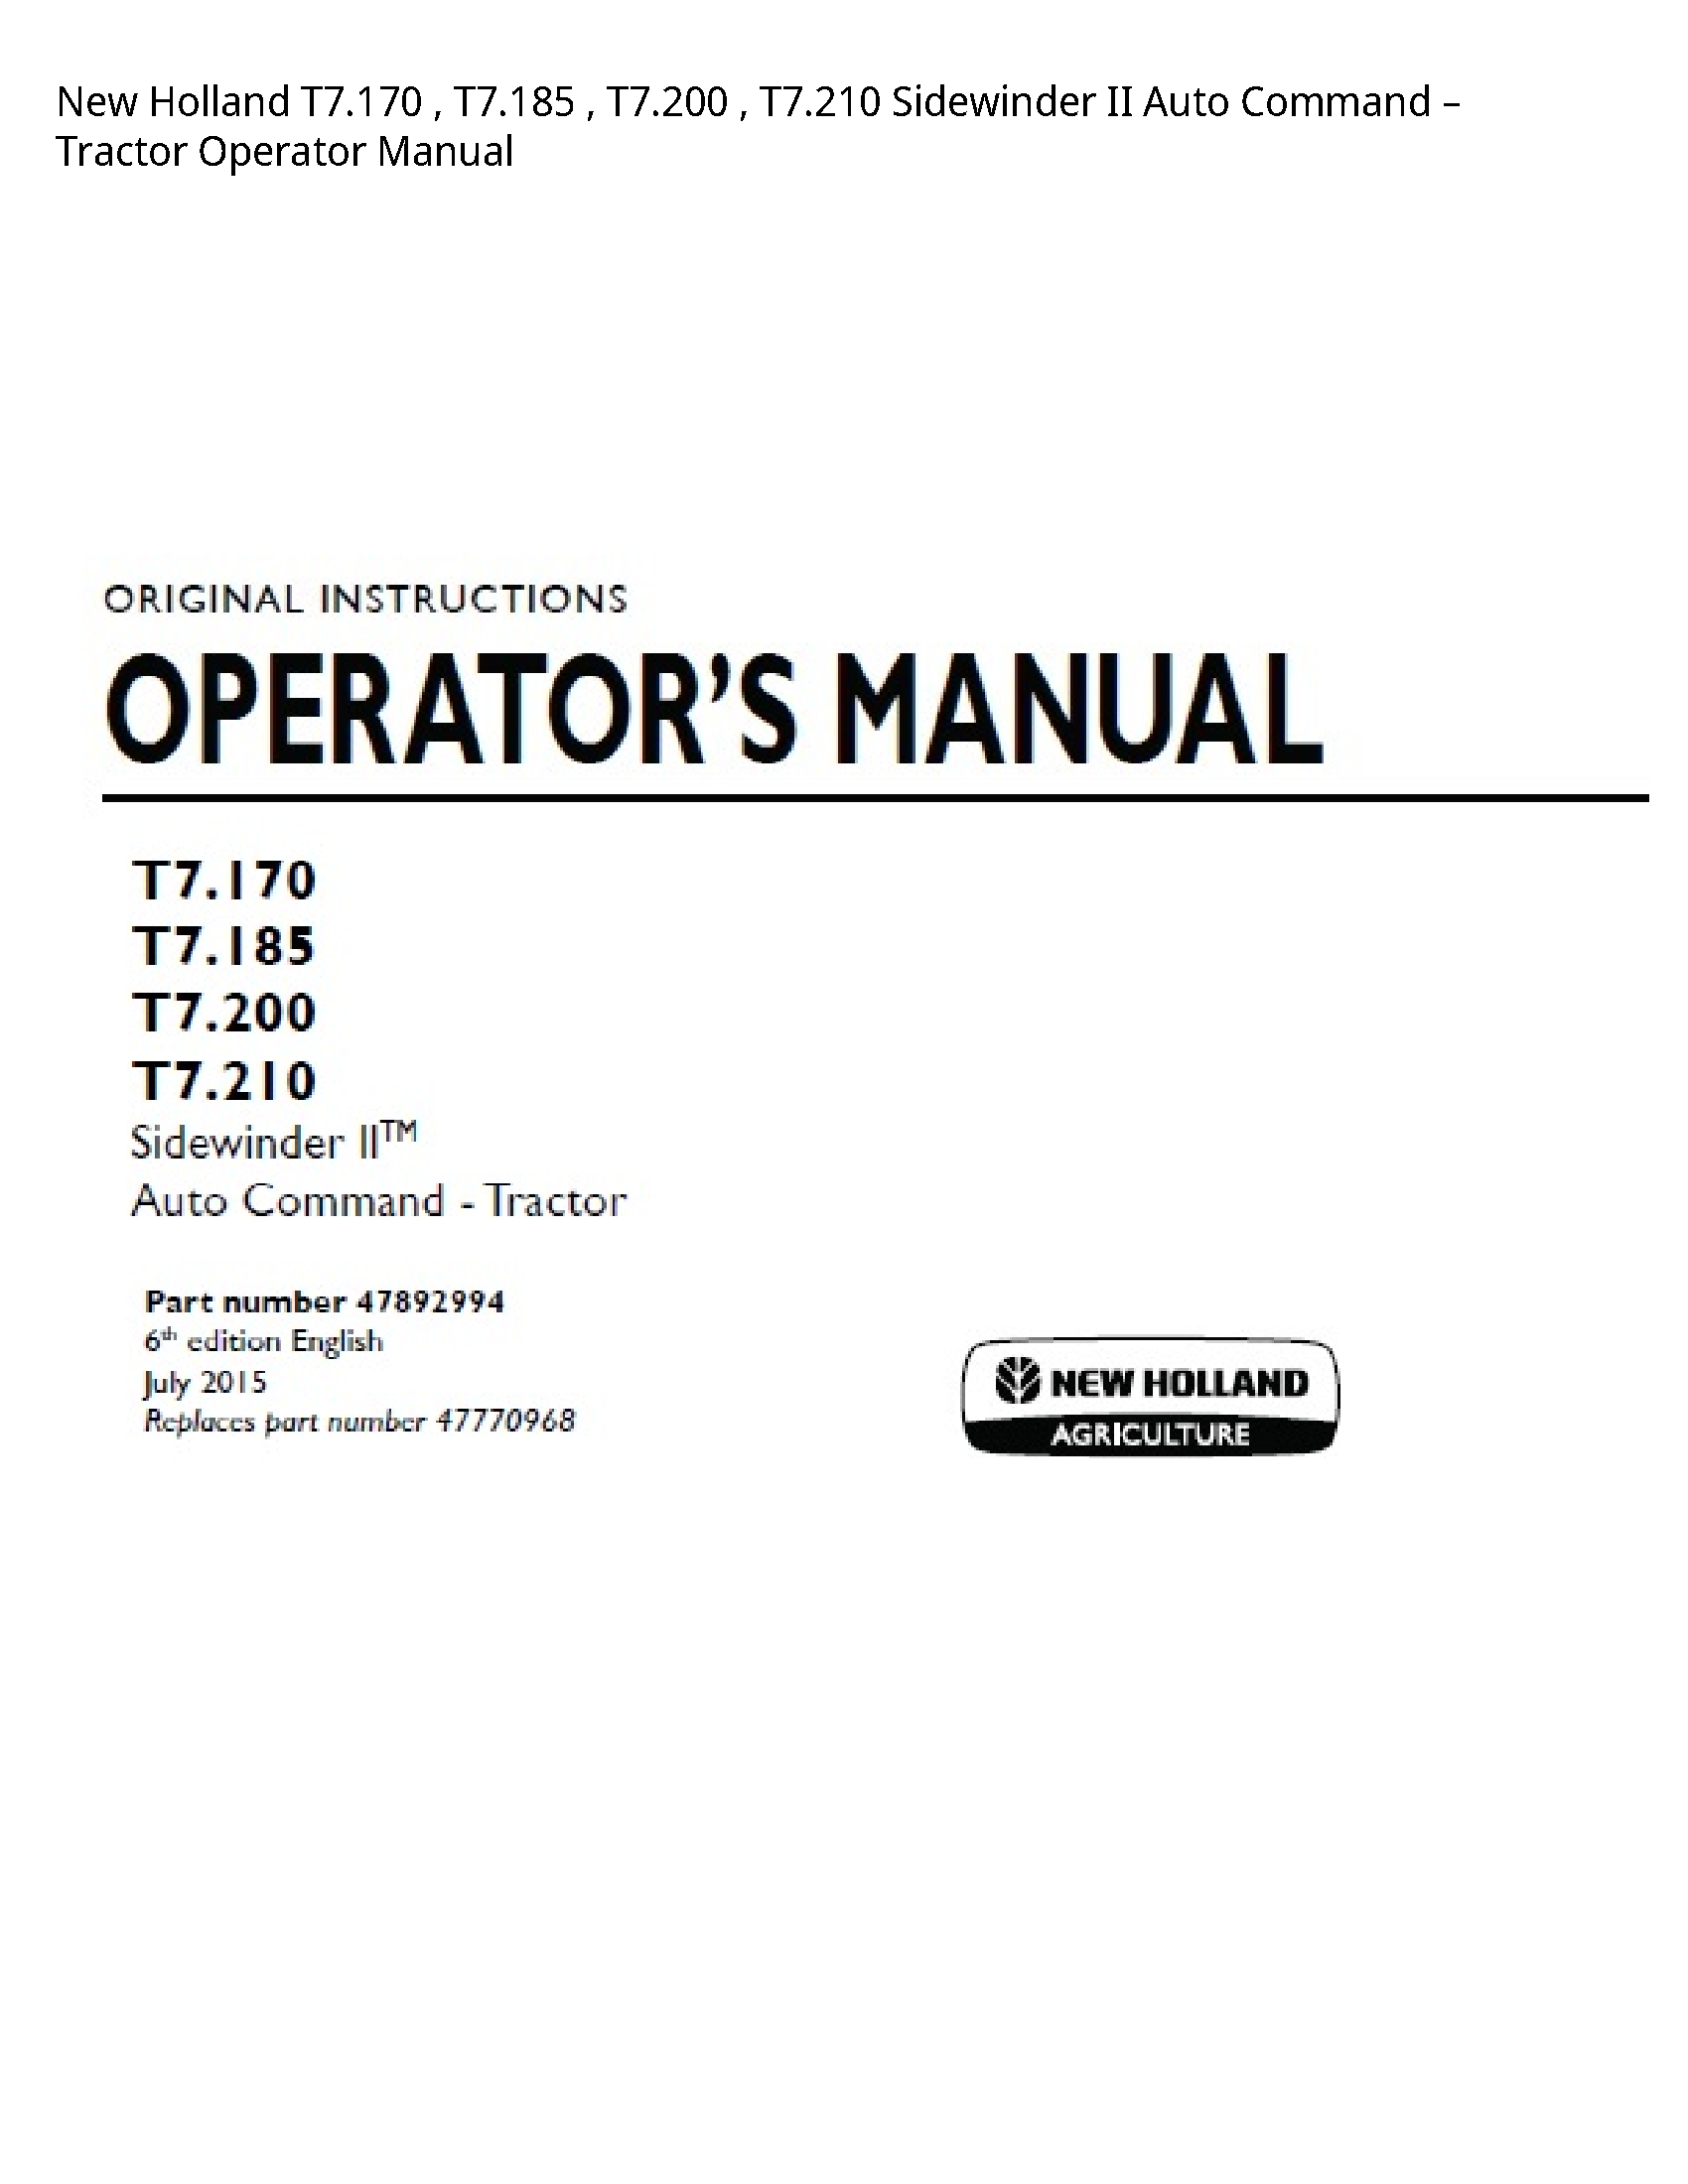 New Holland T7.170 Sidewinder II Auto Command Tractor Operator manual